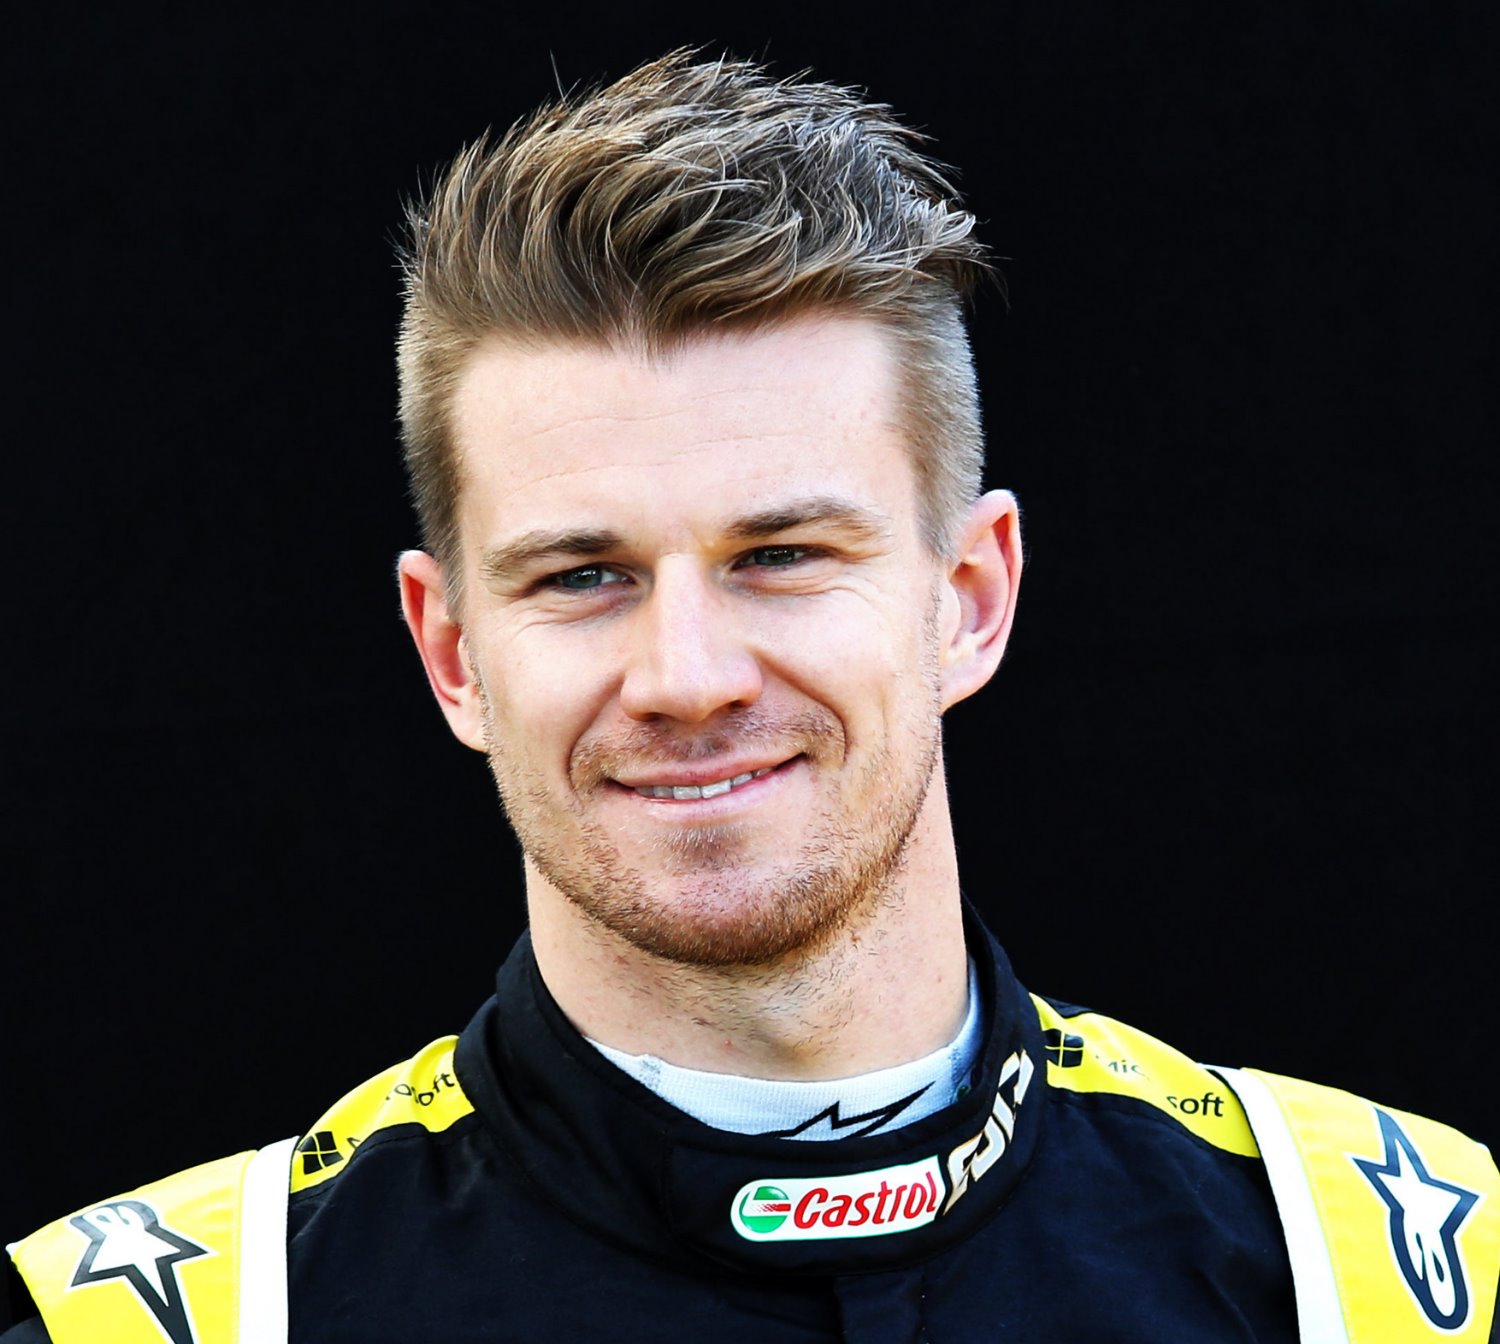 Nico Hulkenberg - are hit nuts not big enough, or his ego too big?